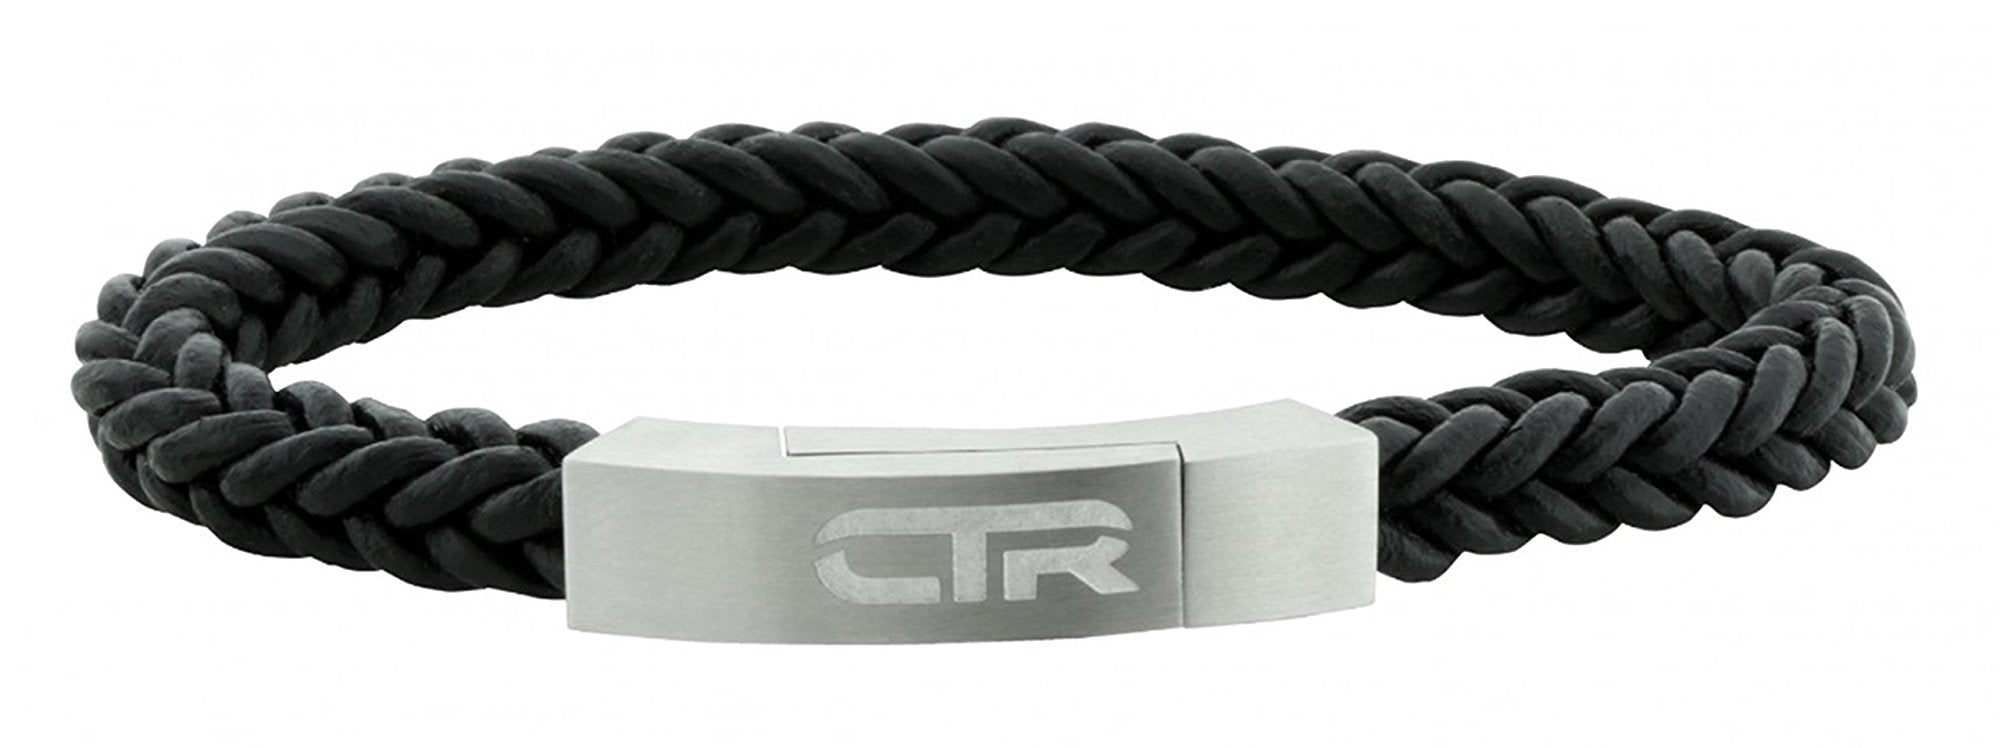 L3 Leather & Stainless Steel CTR bracelet with Magnetic Clasp Surface 